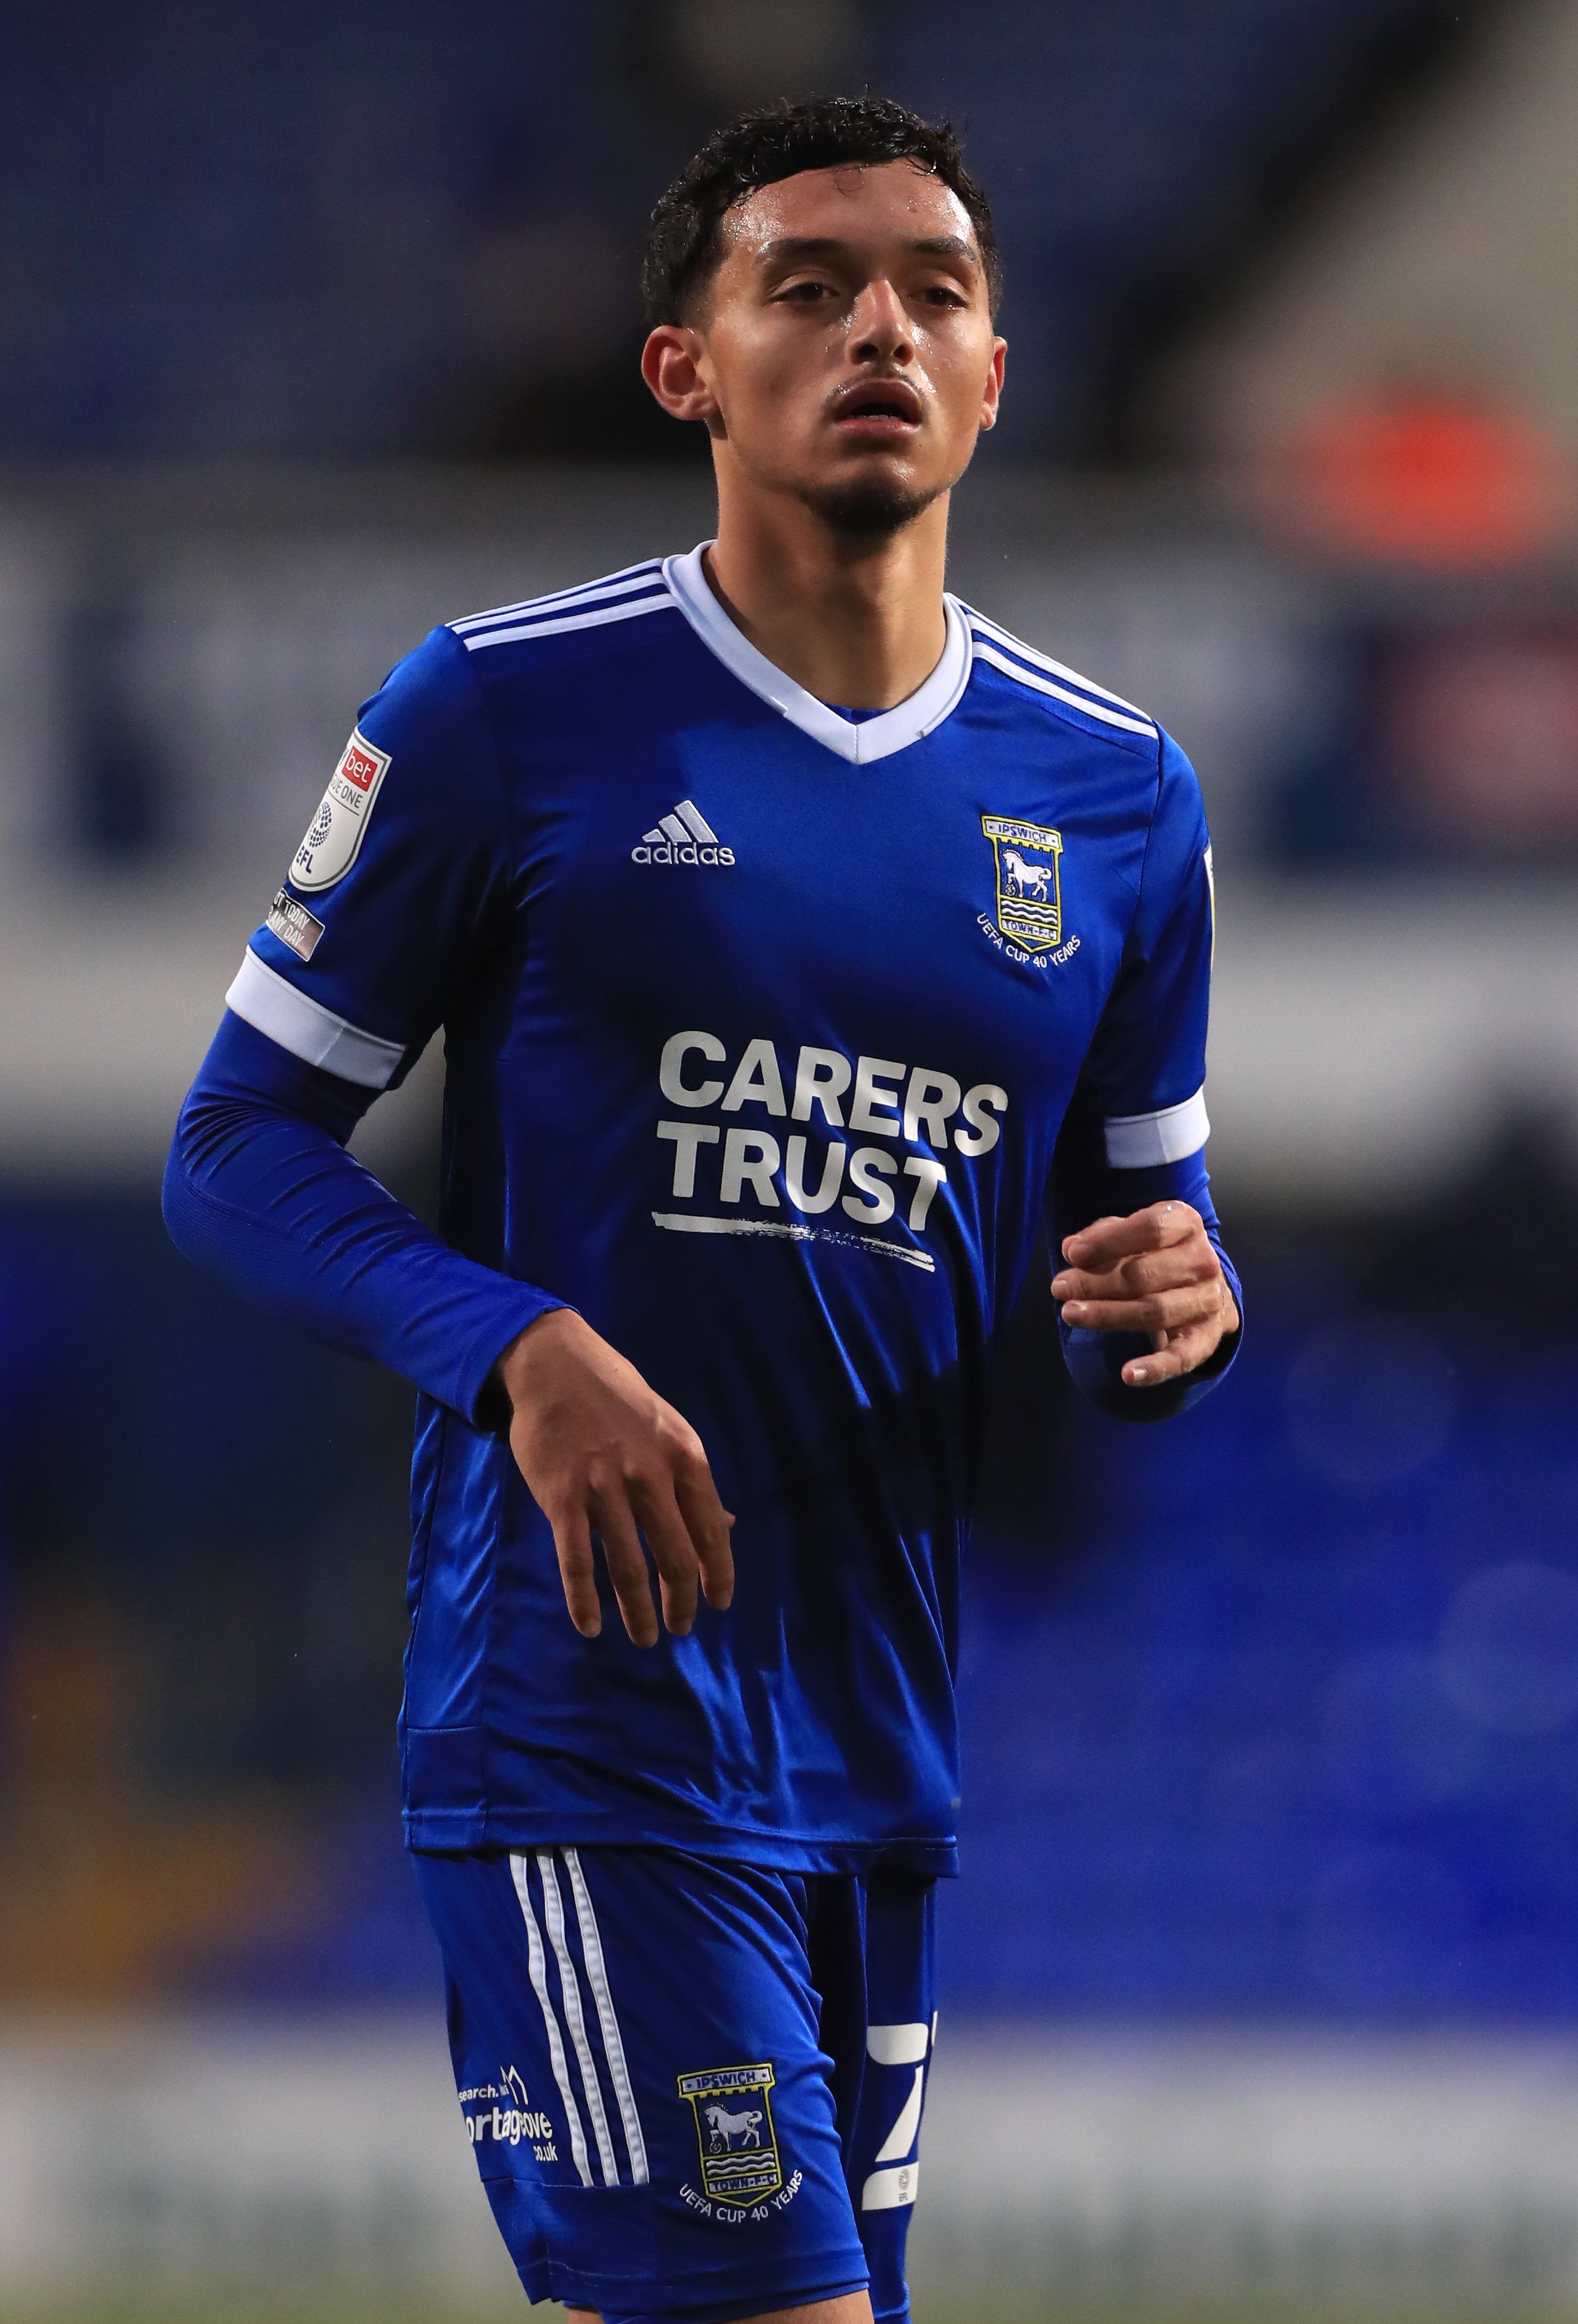 Andre Dozzell has left Ipswich to join Championship club QPR.